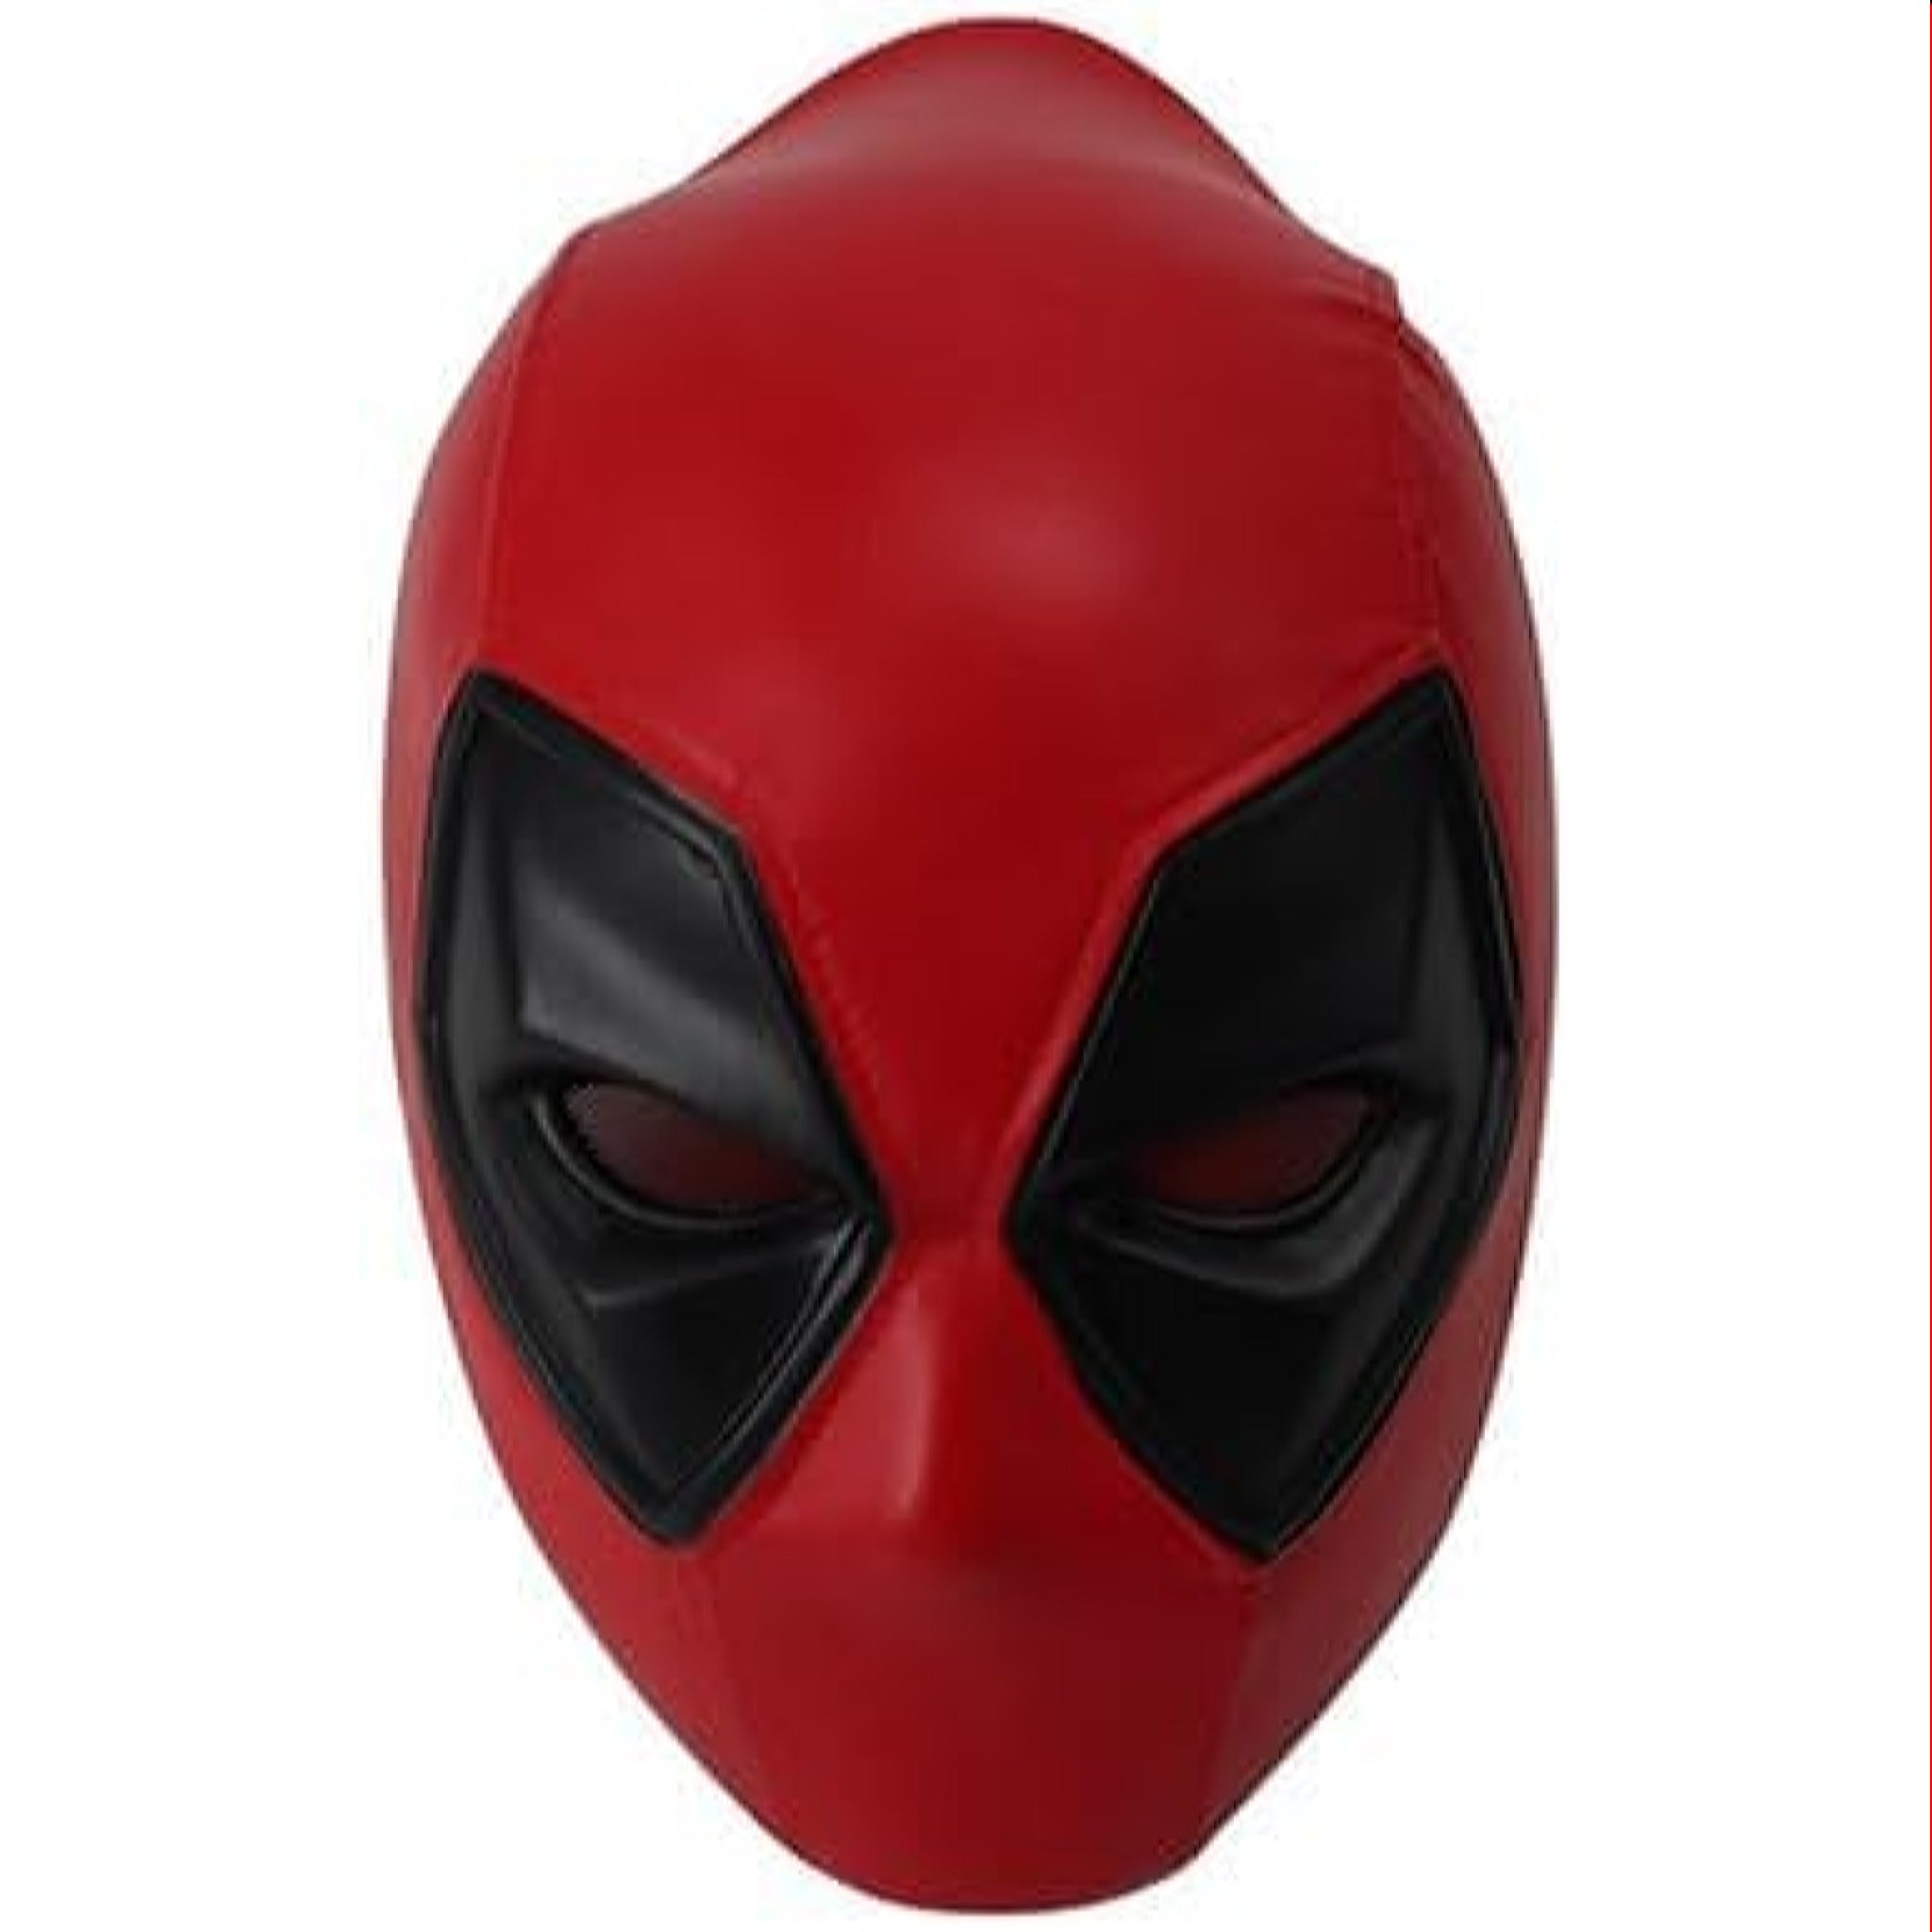 Deadpool Merc with a Mouth Resin Mask Fancy Dress Cosplay Halloween